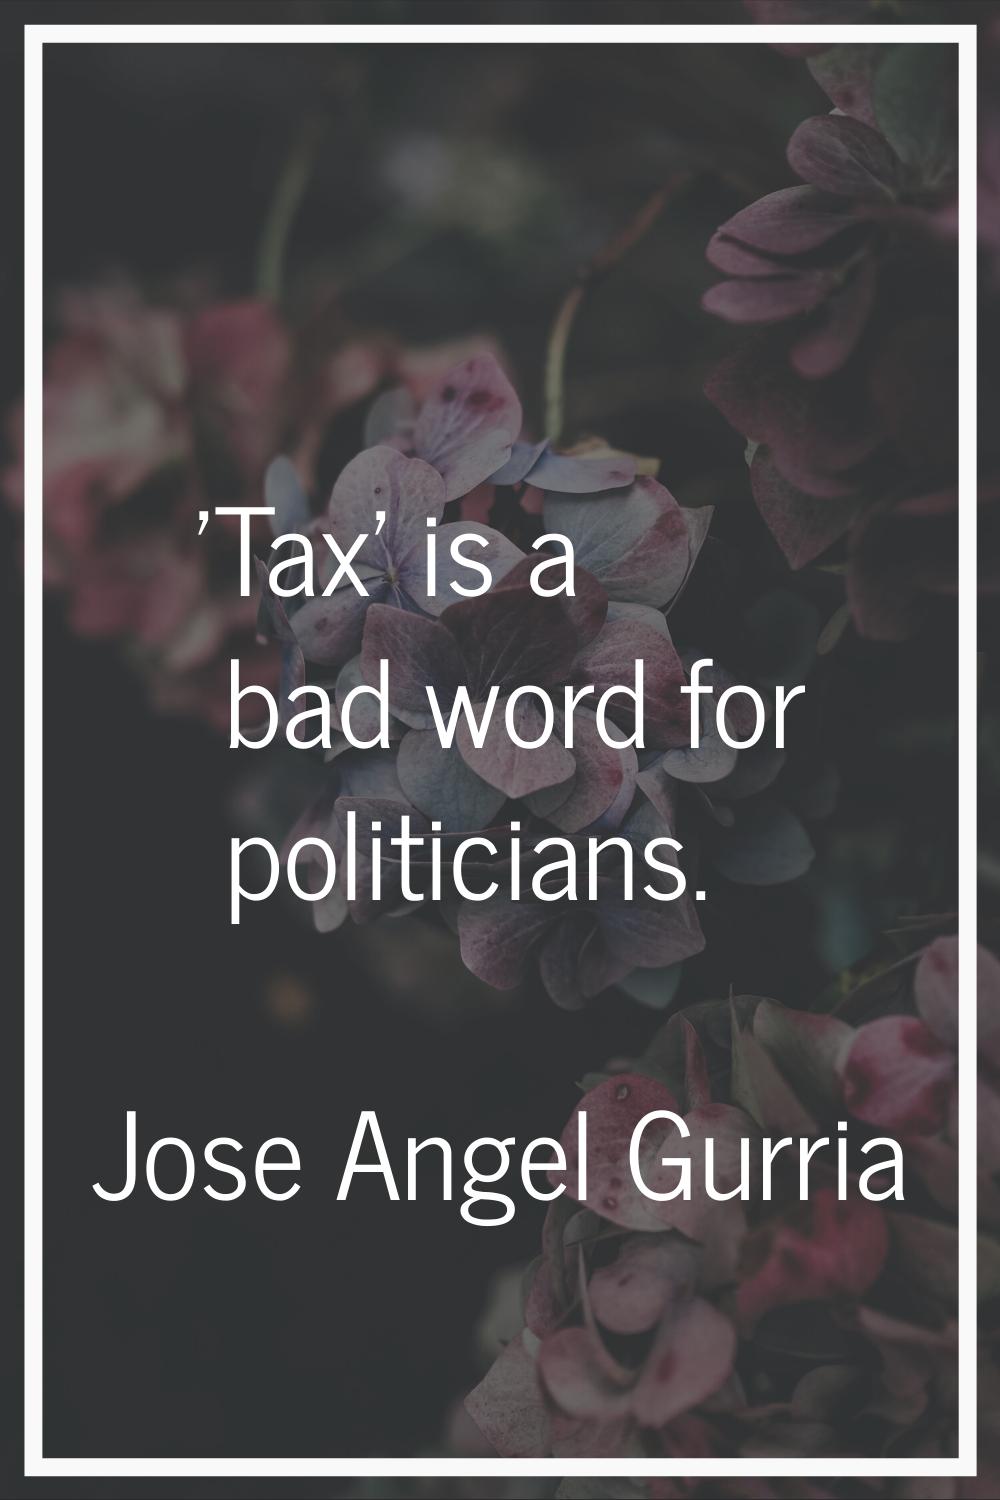 'Tax' is a bad word for politicians.